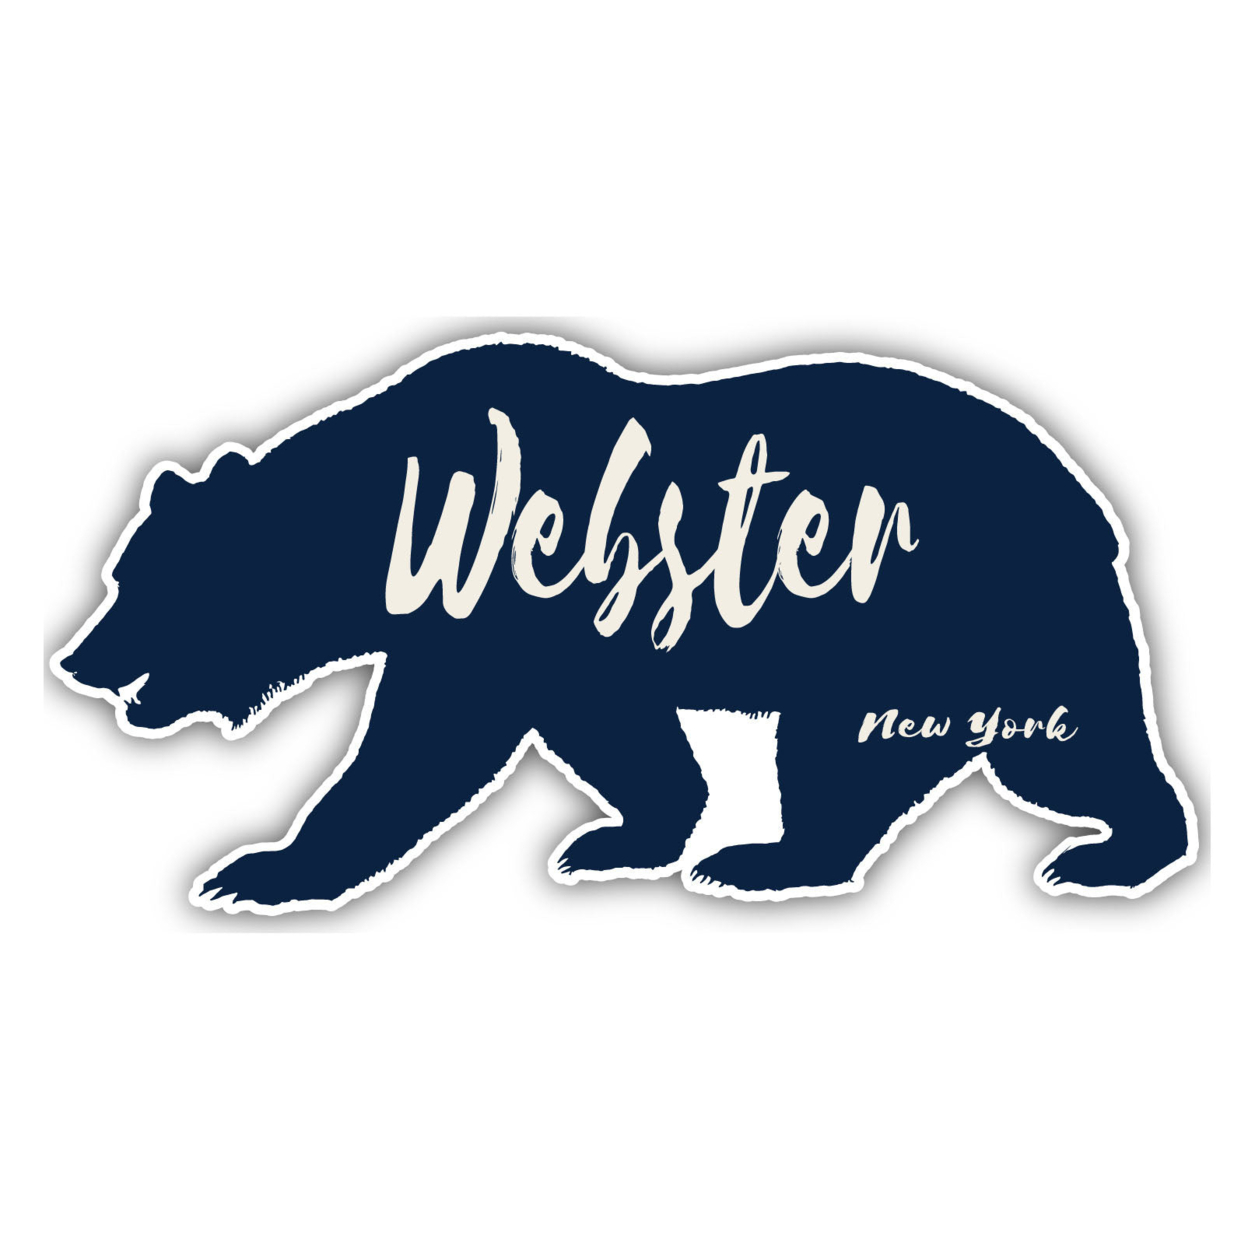 Webster New York Souvenir Decorative Stickers (Choose Theme And Size) - Single Unit, 4-Inch, Bear